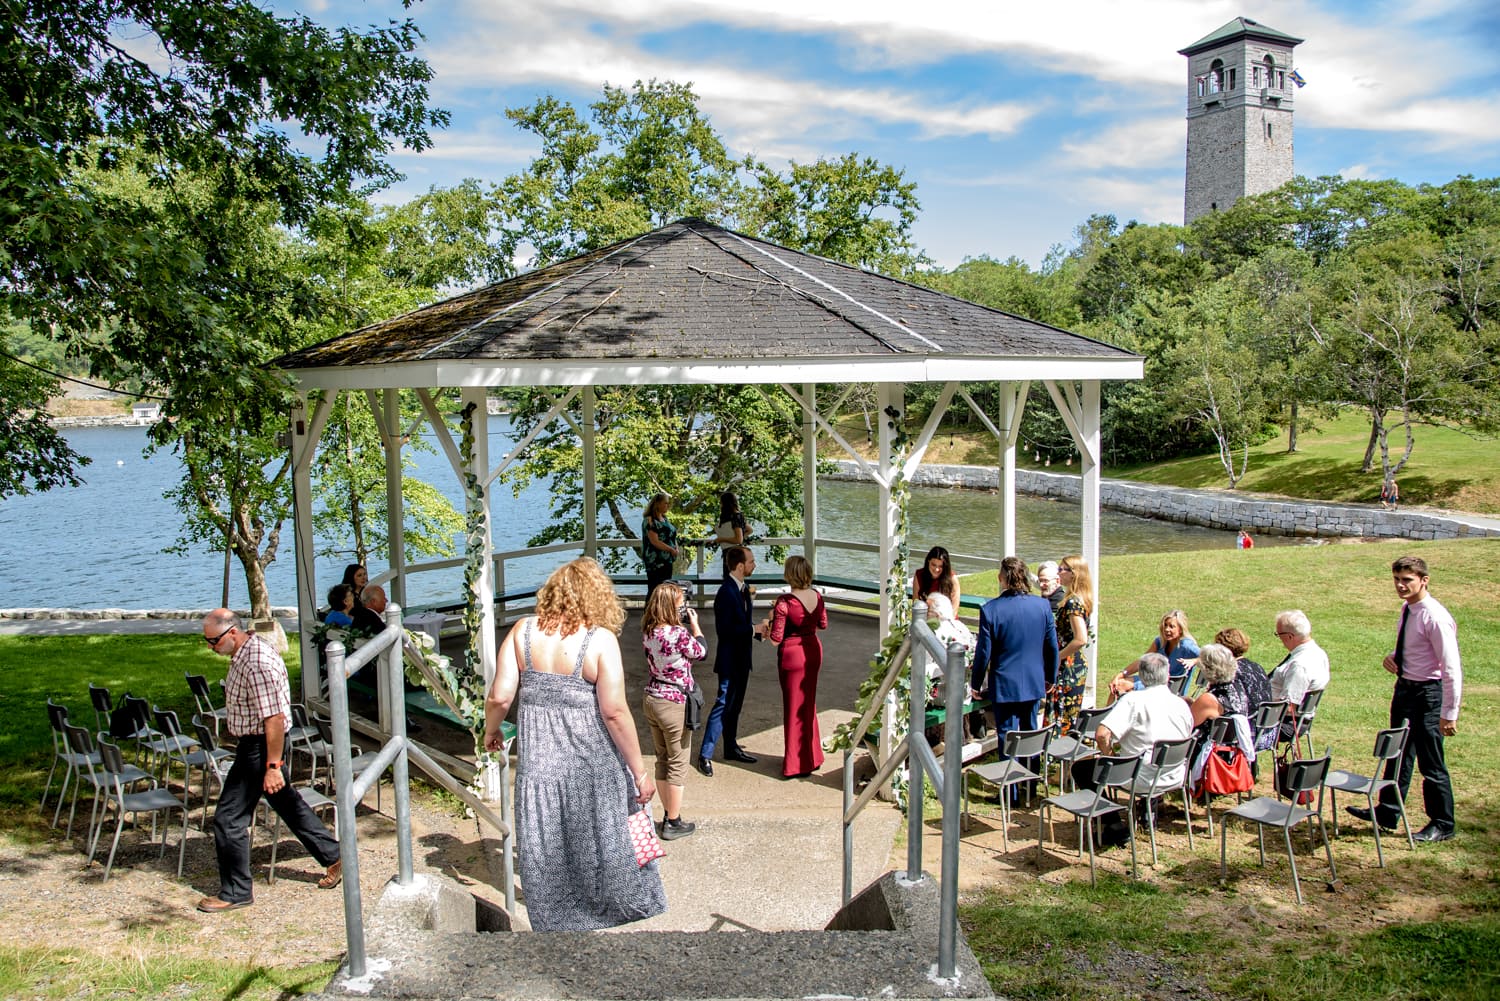 Sandra Adamson, a halifax wedding photographer, at work photographing a wedding at the Dingle Tower gazebo in Halifax, NS.